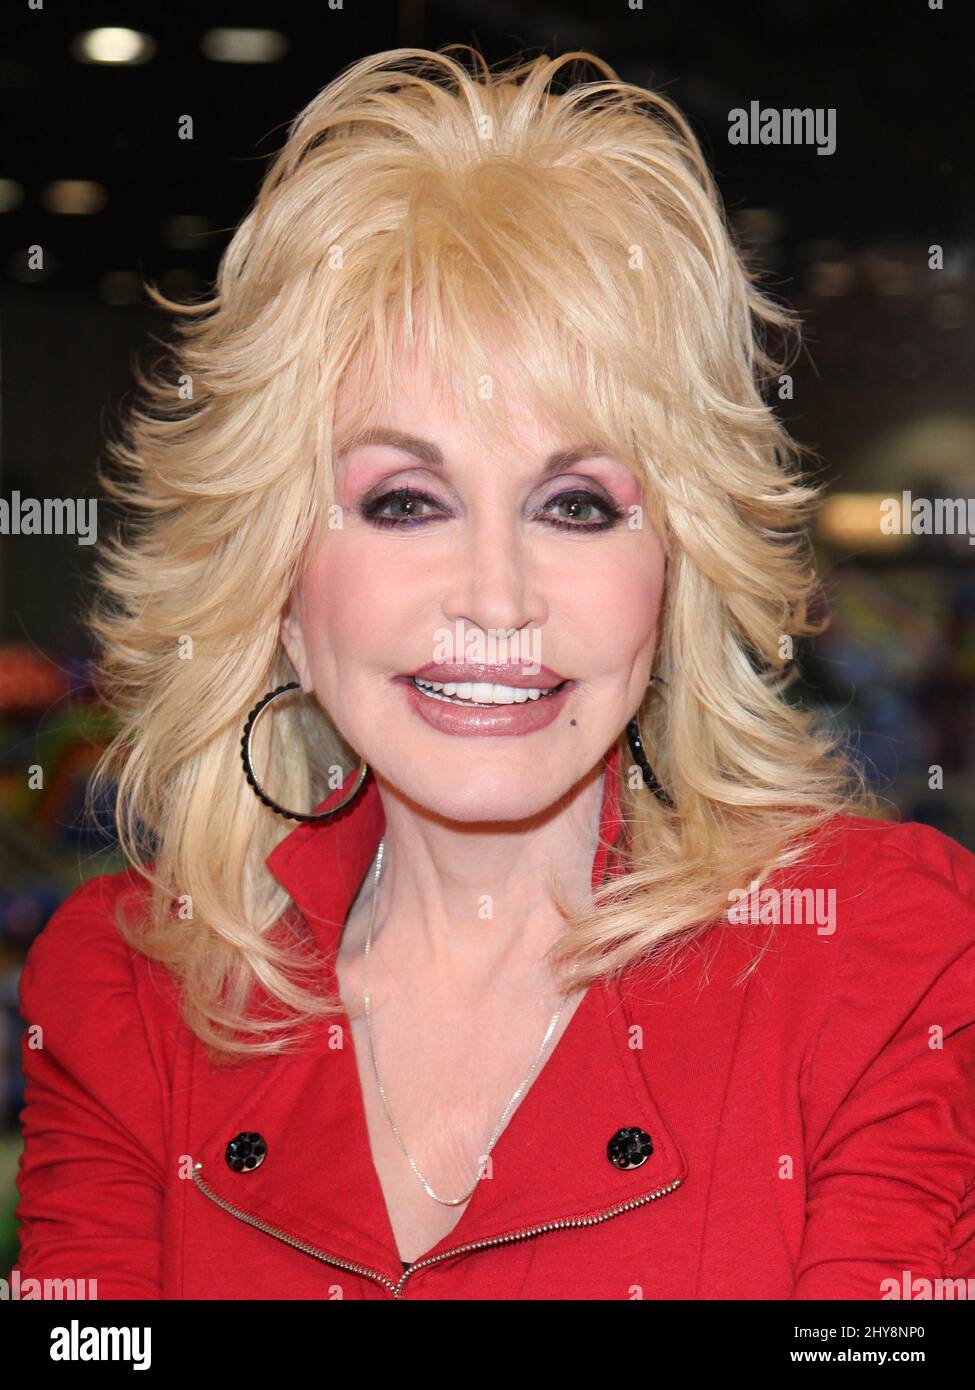 17. November 2010 Orlando, Fla. Dolly Parton International Association of Amusement Parks and Attractions Expo 2010 im Orange County Convention Center Stockfoto